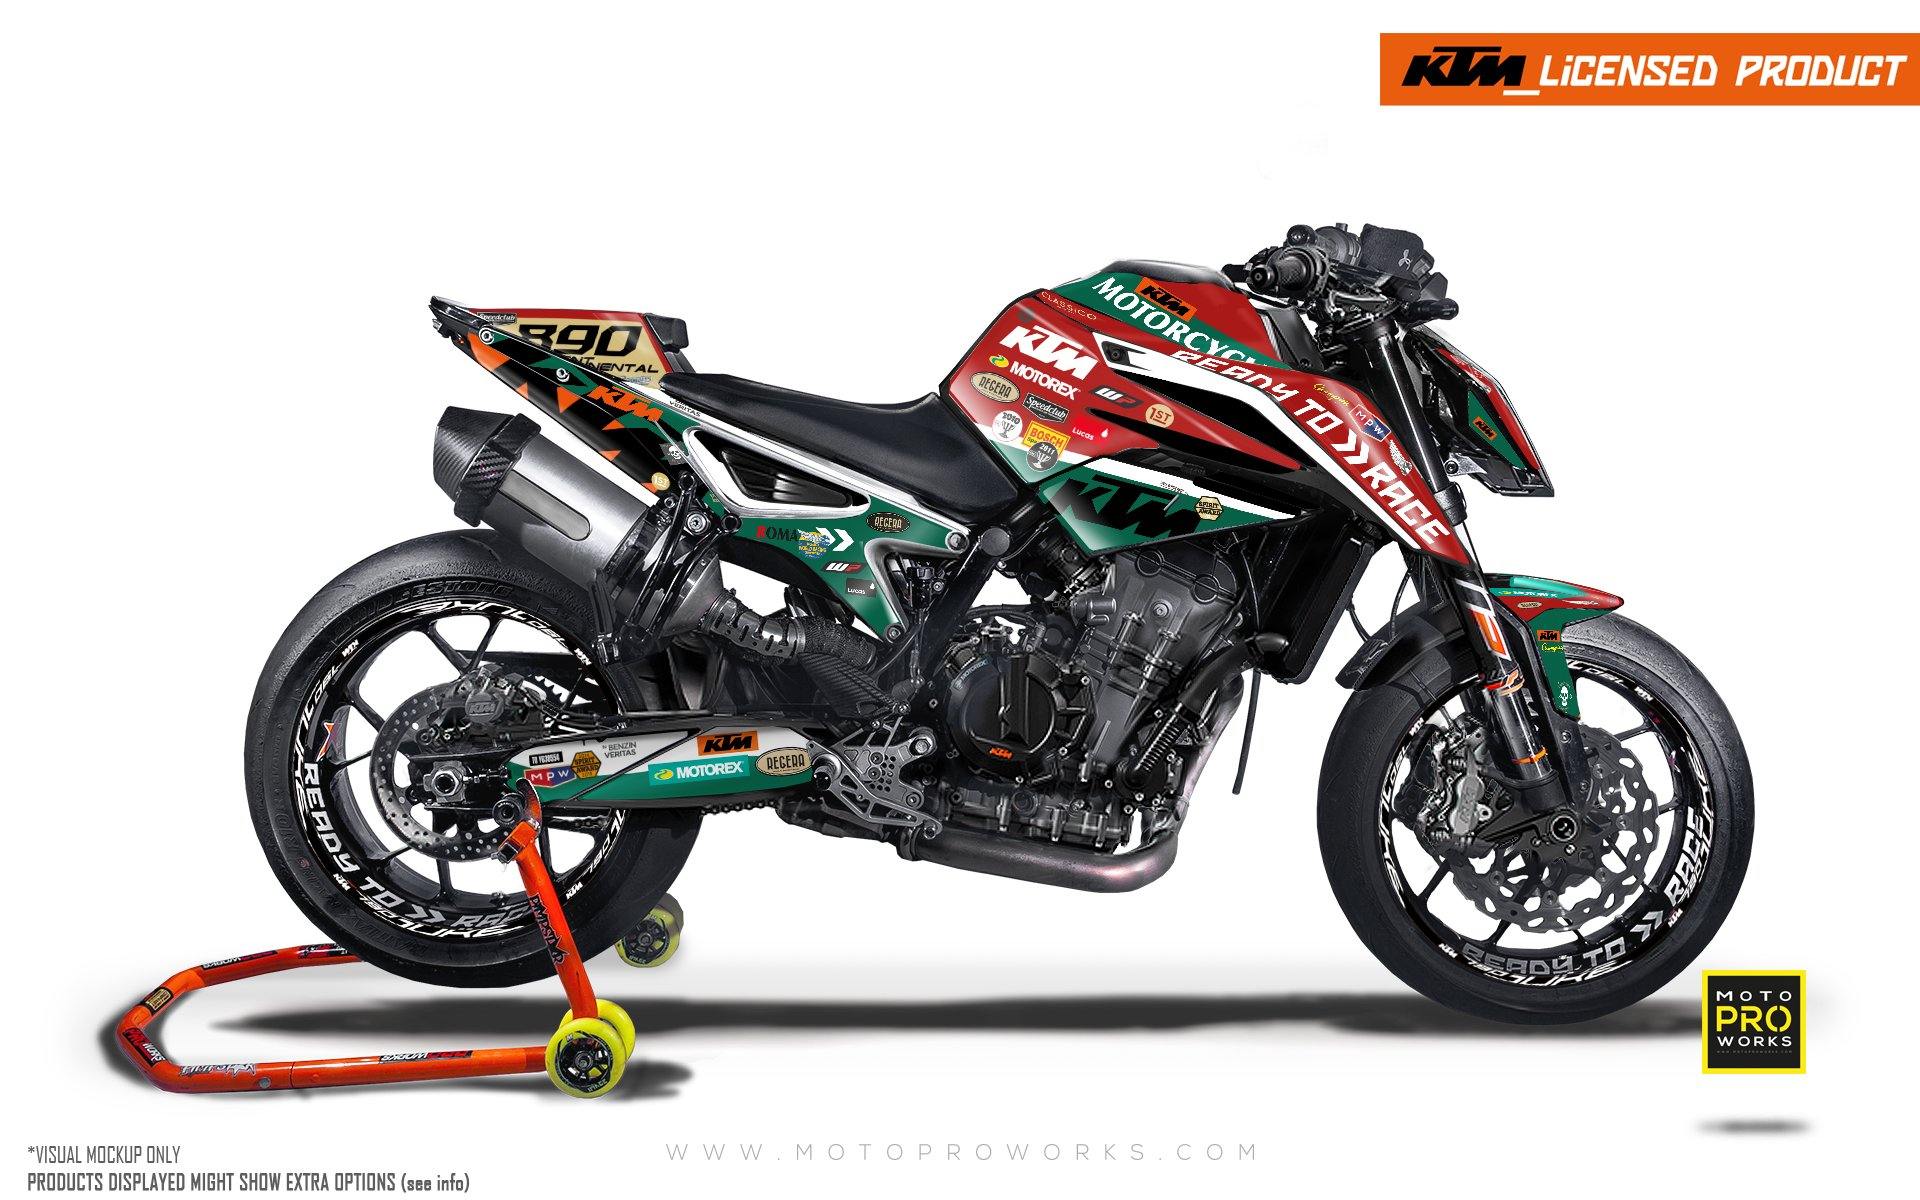 KTM 790/890 R Duke GRAPHIC KIT - "Regera" (Red/Green) - MotoProWorks | Decals and Bike Graphic kit